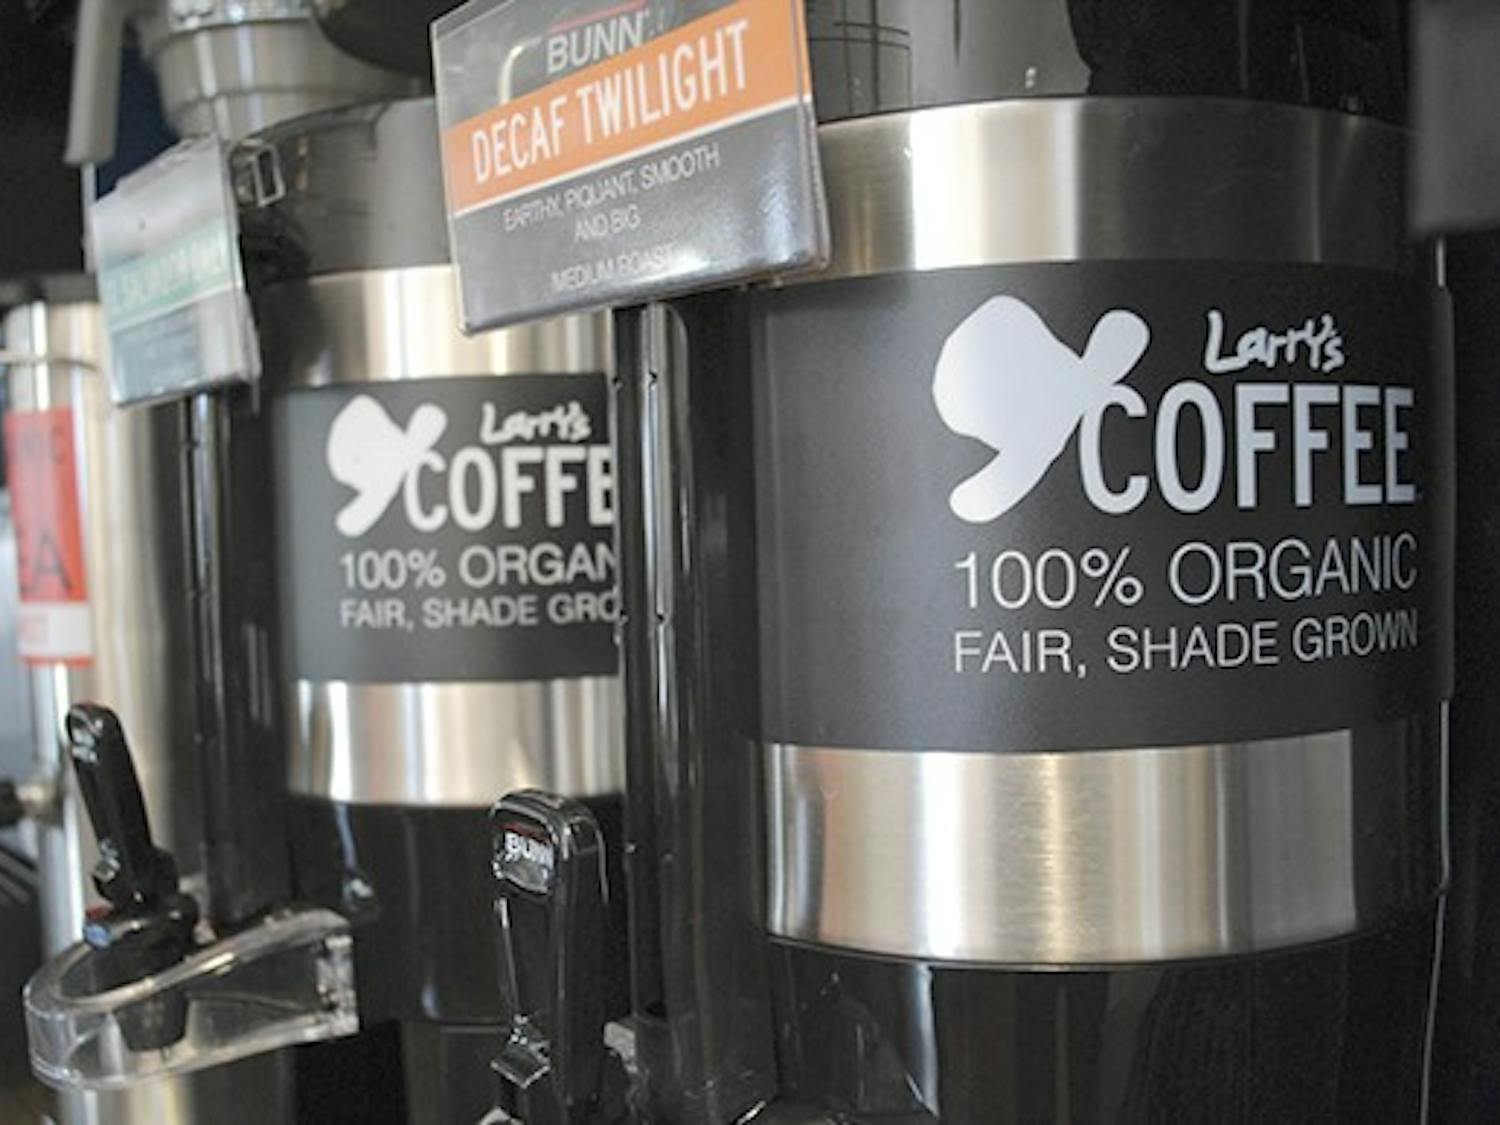 Larry's Coffee, which is 100% organic, is now served in Lenoir Dining Hall. 